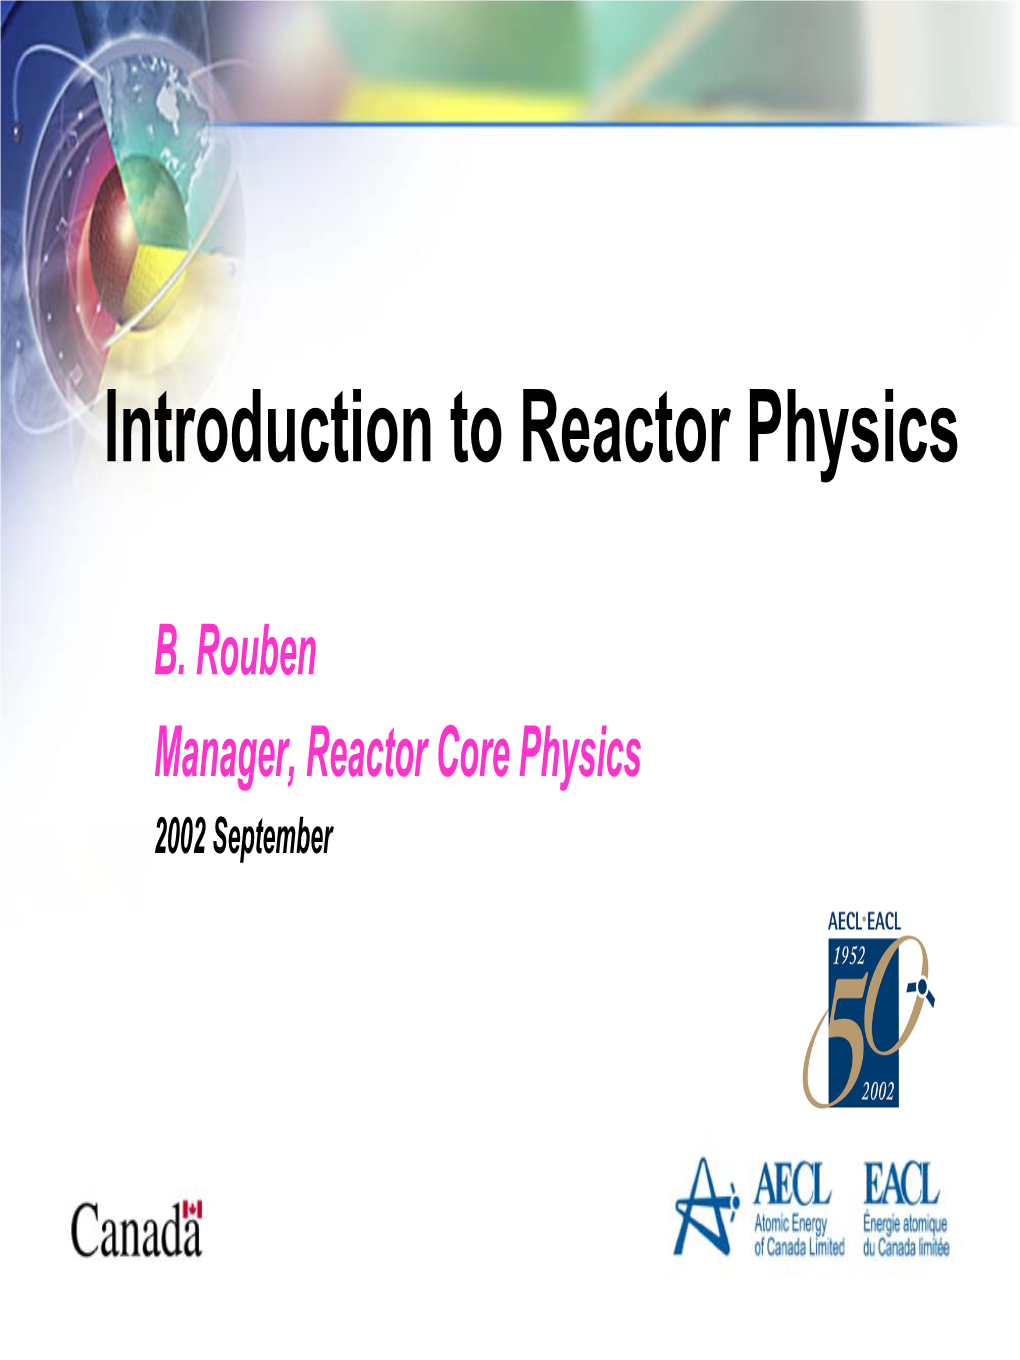 Introduction to Reactor Physics